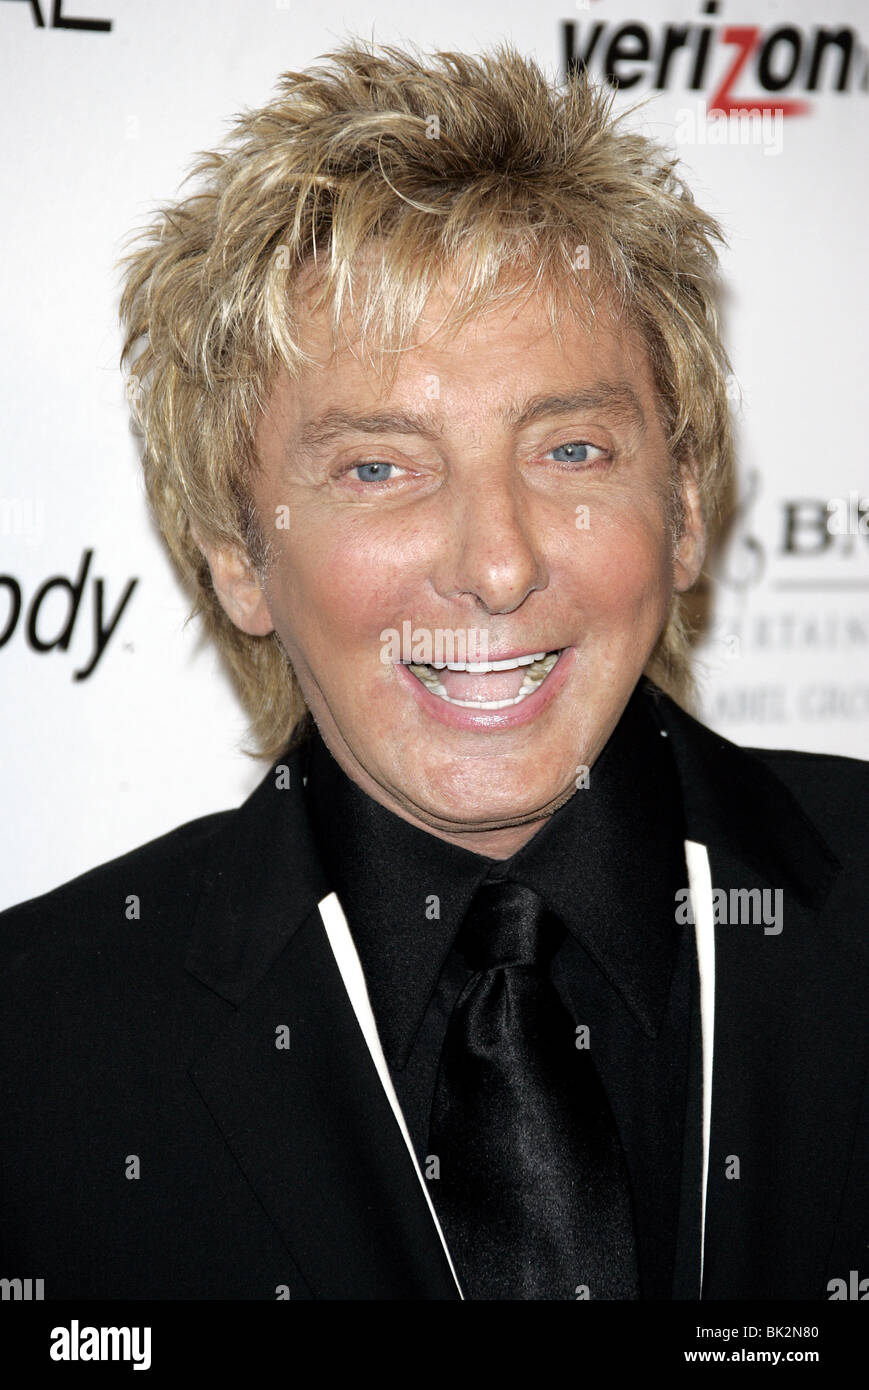 BARRY MANILOW 2007 CLIVE DAVIS PRE GRAMMY PARTY Beverly Hilton Hotel BEVERLY HILLS LOS ANGELES USA 10 Février 2007 Banque D'Images